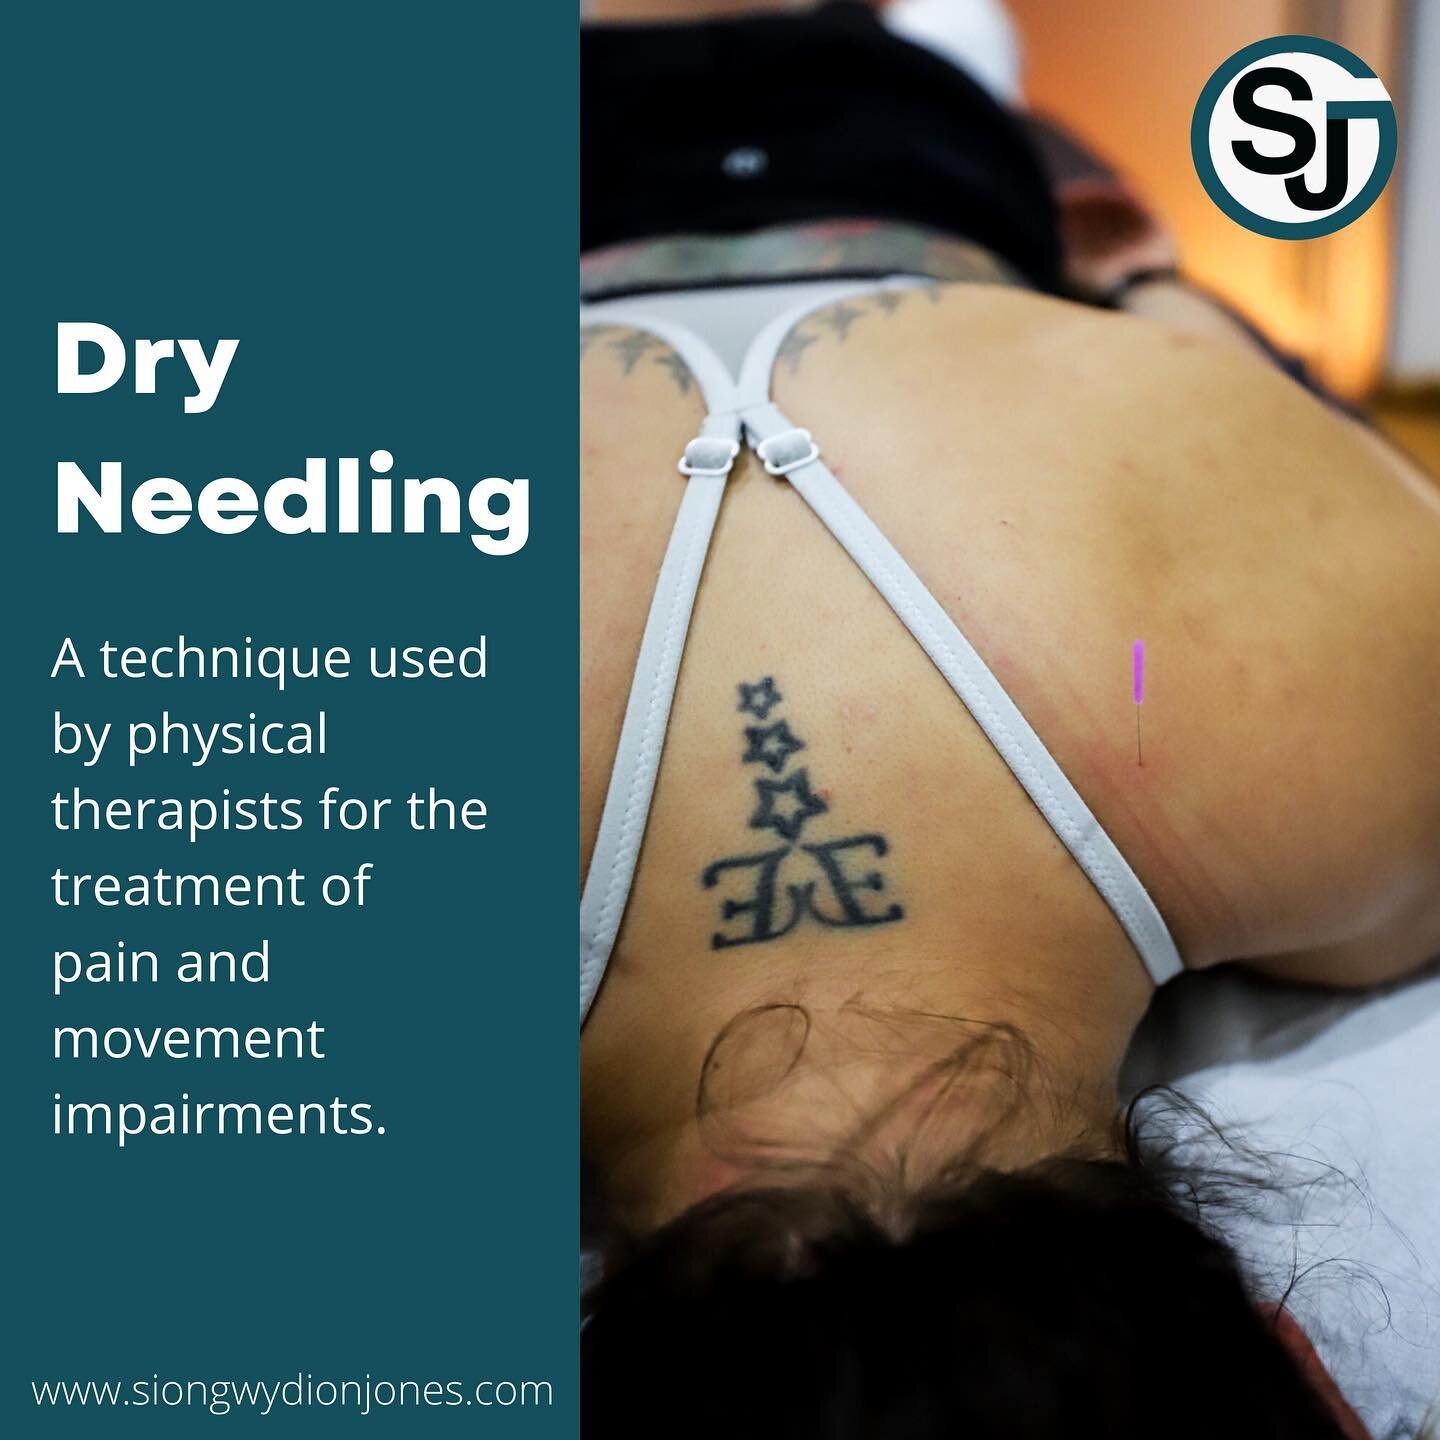 The main benefit of dry needling is pain relief for muscular pain and stiffness. But increase of range of motion and flexibility is common, hence why I use it frequently to treat sports injuries, postoperative patients and even fibromyalgia pain. Dry